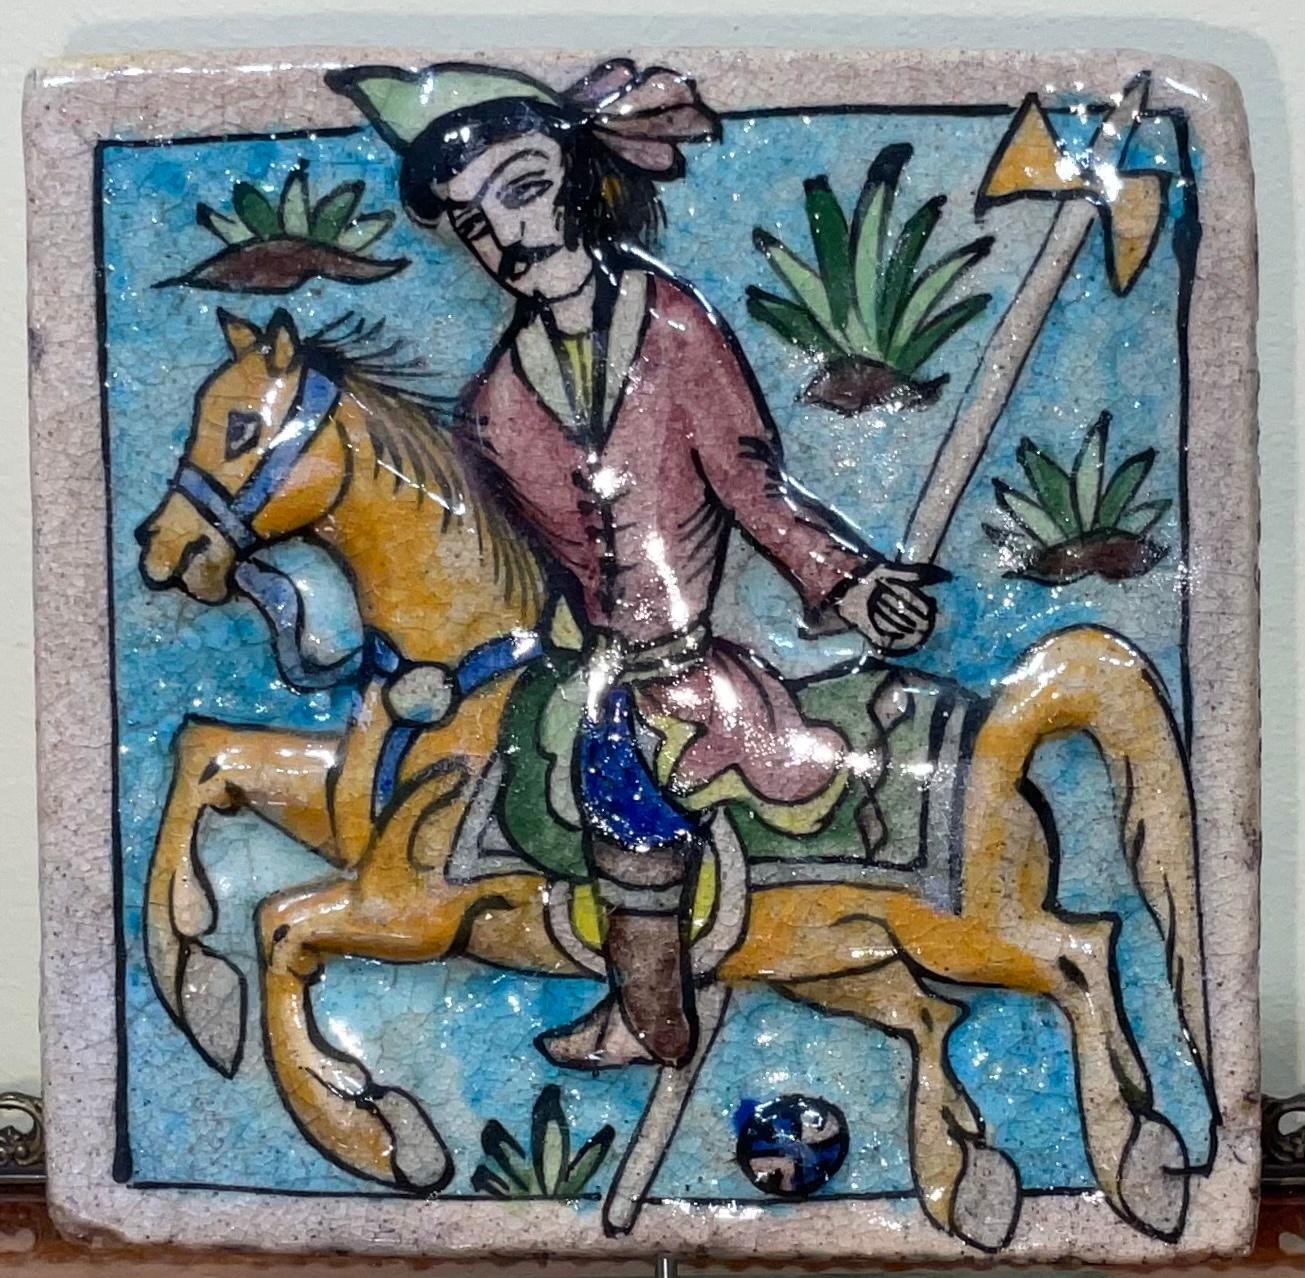 Hand painted and glazed Persian tile, mounted on a bronze base of ancient polo player on horse.
Beautiful object of art for any room 
Actual tile size : 6”.75 x 6”.75.